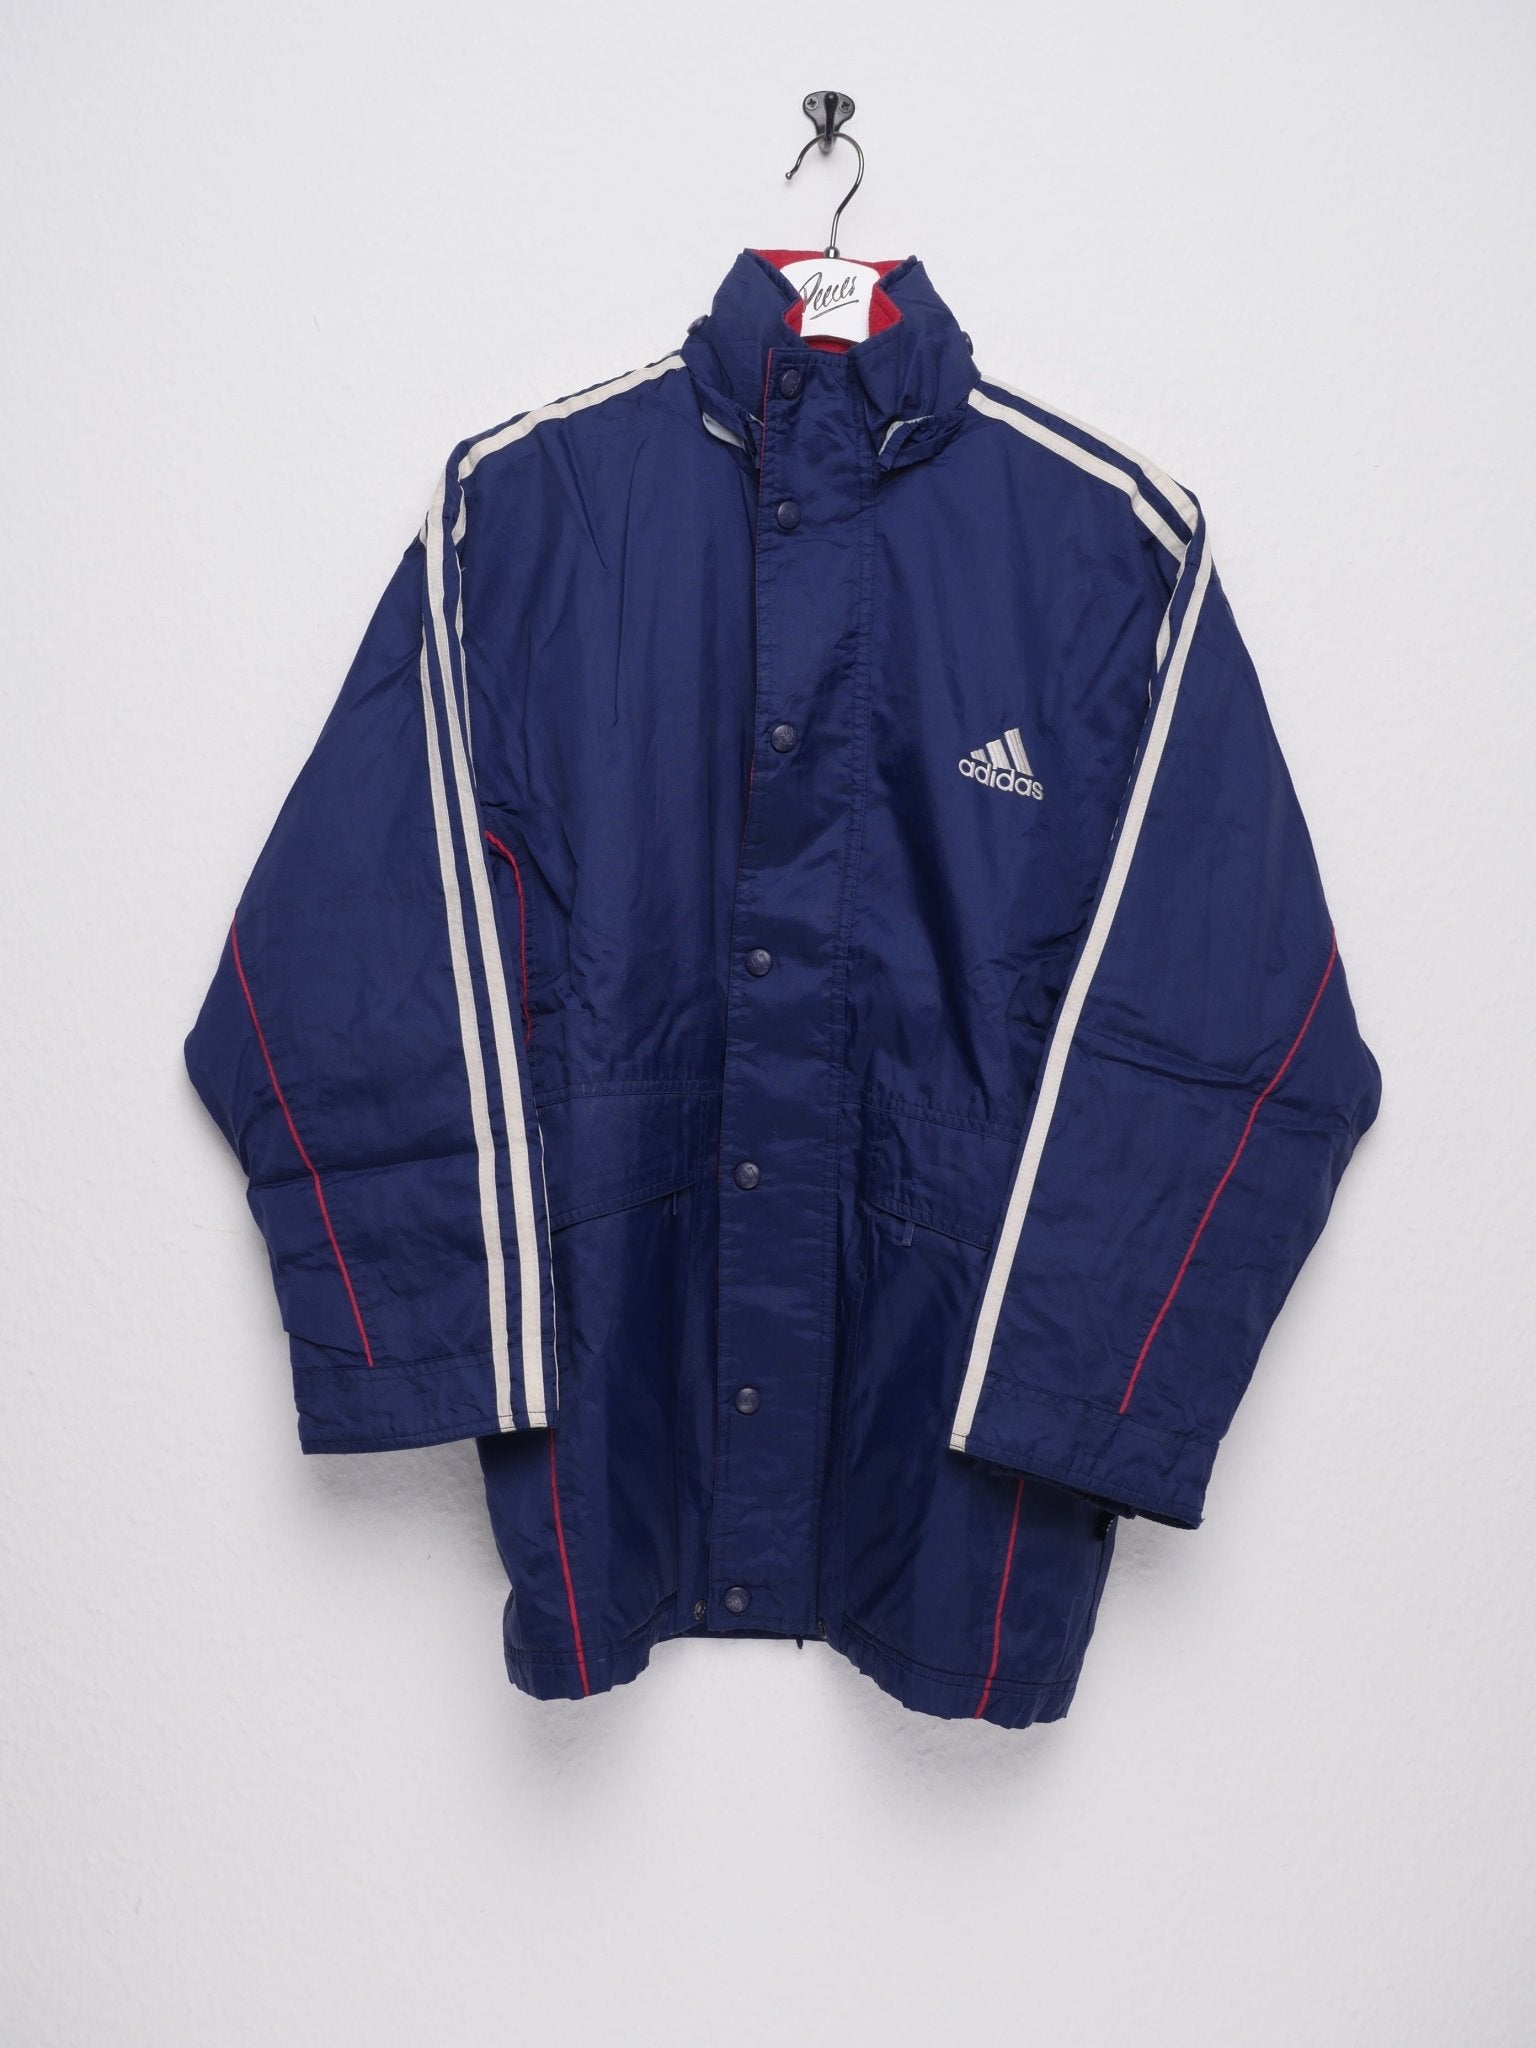 adidas embroidered Logo two toned Vintage heavy Track Jacket - Peeces